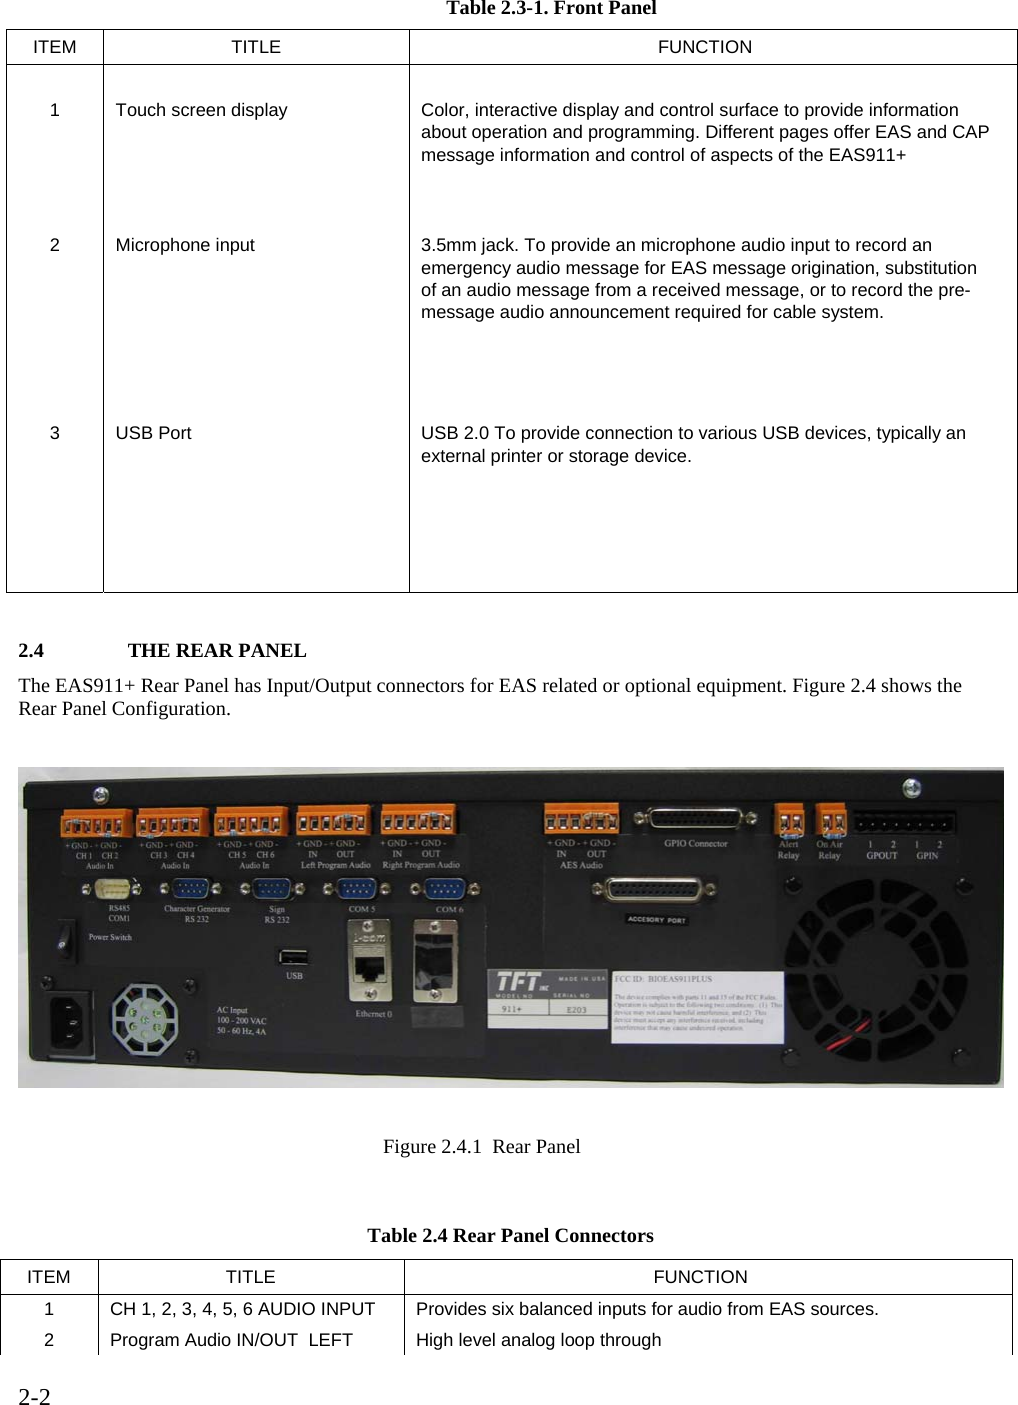  2-2Table 2.3-1. Front Panel  ITEM TITLE  FUNCTION     1  Touch screen display  Color, interactive display and control surface to provide information about operation and programming. Different pages offer EAS and CAP message information and control of aspects of the EAS911+   2  Microphone input   3.5mm jack. To provide an microphone audio input to record an emergency audio message for EAS message origination, substitution of an audio message from a received message, or to record the pre-message audio announcement required for cable system.    3  USB Port  USB 2.0 To provide connection to various USB devices, typically an external printer or storage device.         2.4   THE REAR PANEL The EAS911+ Rear Panel has Input/Output connectors for EAS related or optional equipment. Figure 2.4 shows the Rear Panel Configuration.    Figure 2.4.1  Rear Panel   Table 2.4 Rear Panel Connectors ITEM TITLE  FUNCTION 1  CH 1, 2, 3, 4, 5, 6 AUDIO INPUT  Provides six balanced inputs for audio from EAS sources. 2  Program Audio IN/OUT  LEFT  High level analog loop through 